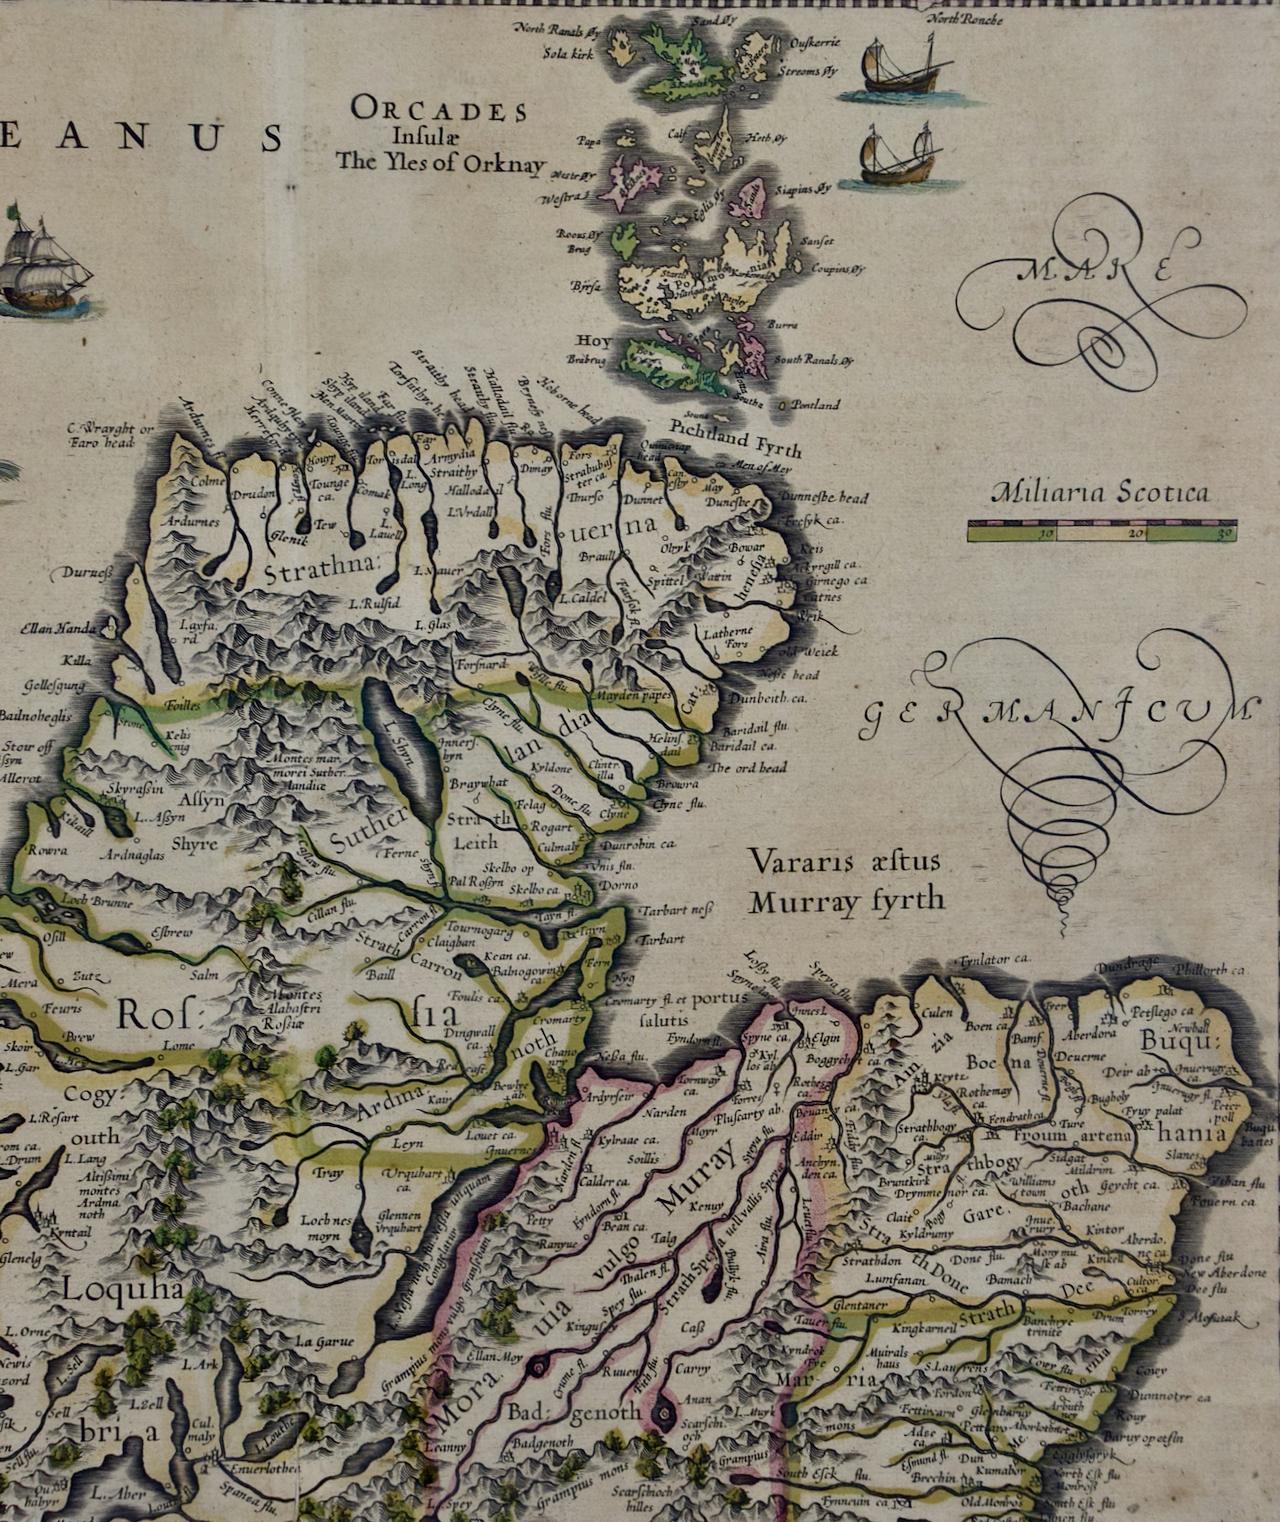 Dutch Northern Scotland: A 17th Century Hand-colored Map by Mercator For Sale